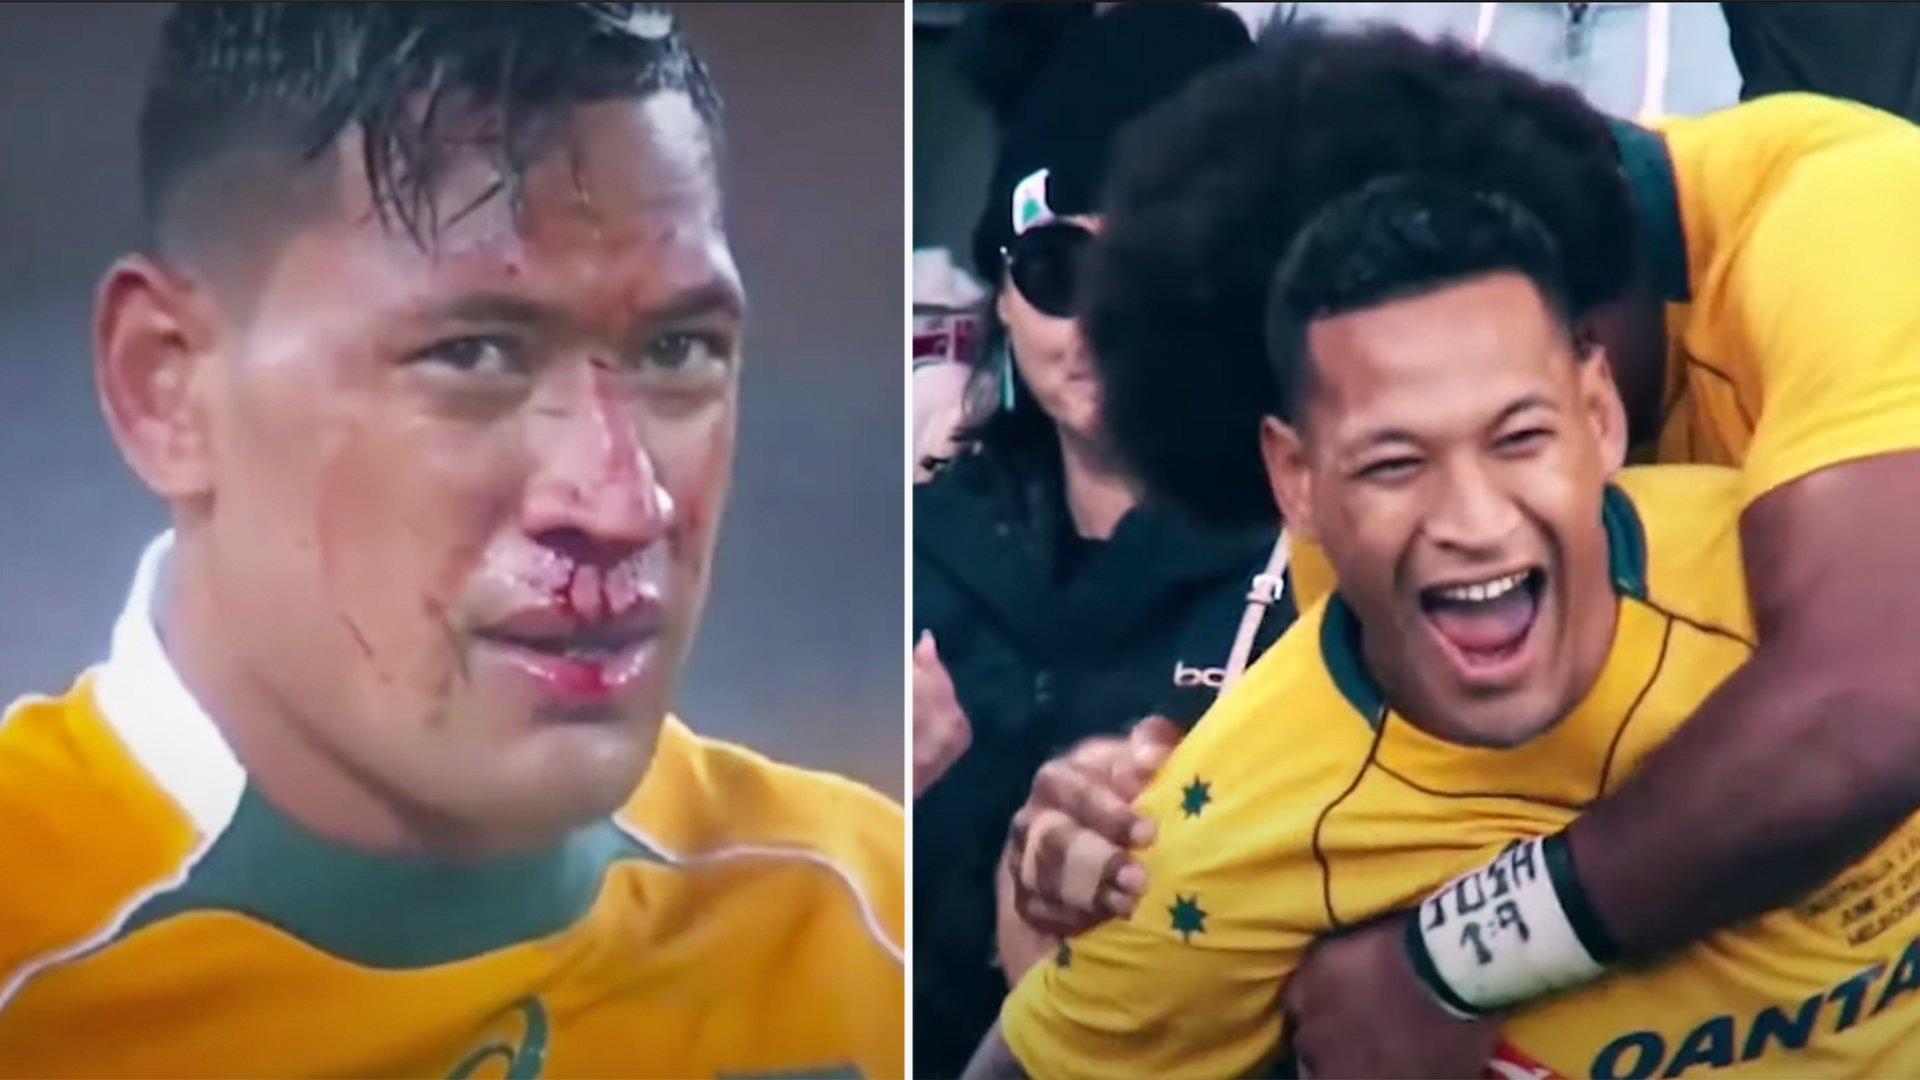 People are getting upset about new Israel Folau video which is depressing truth for Australia fans